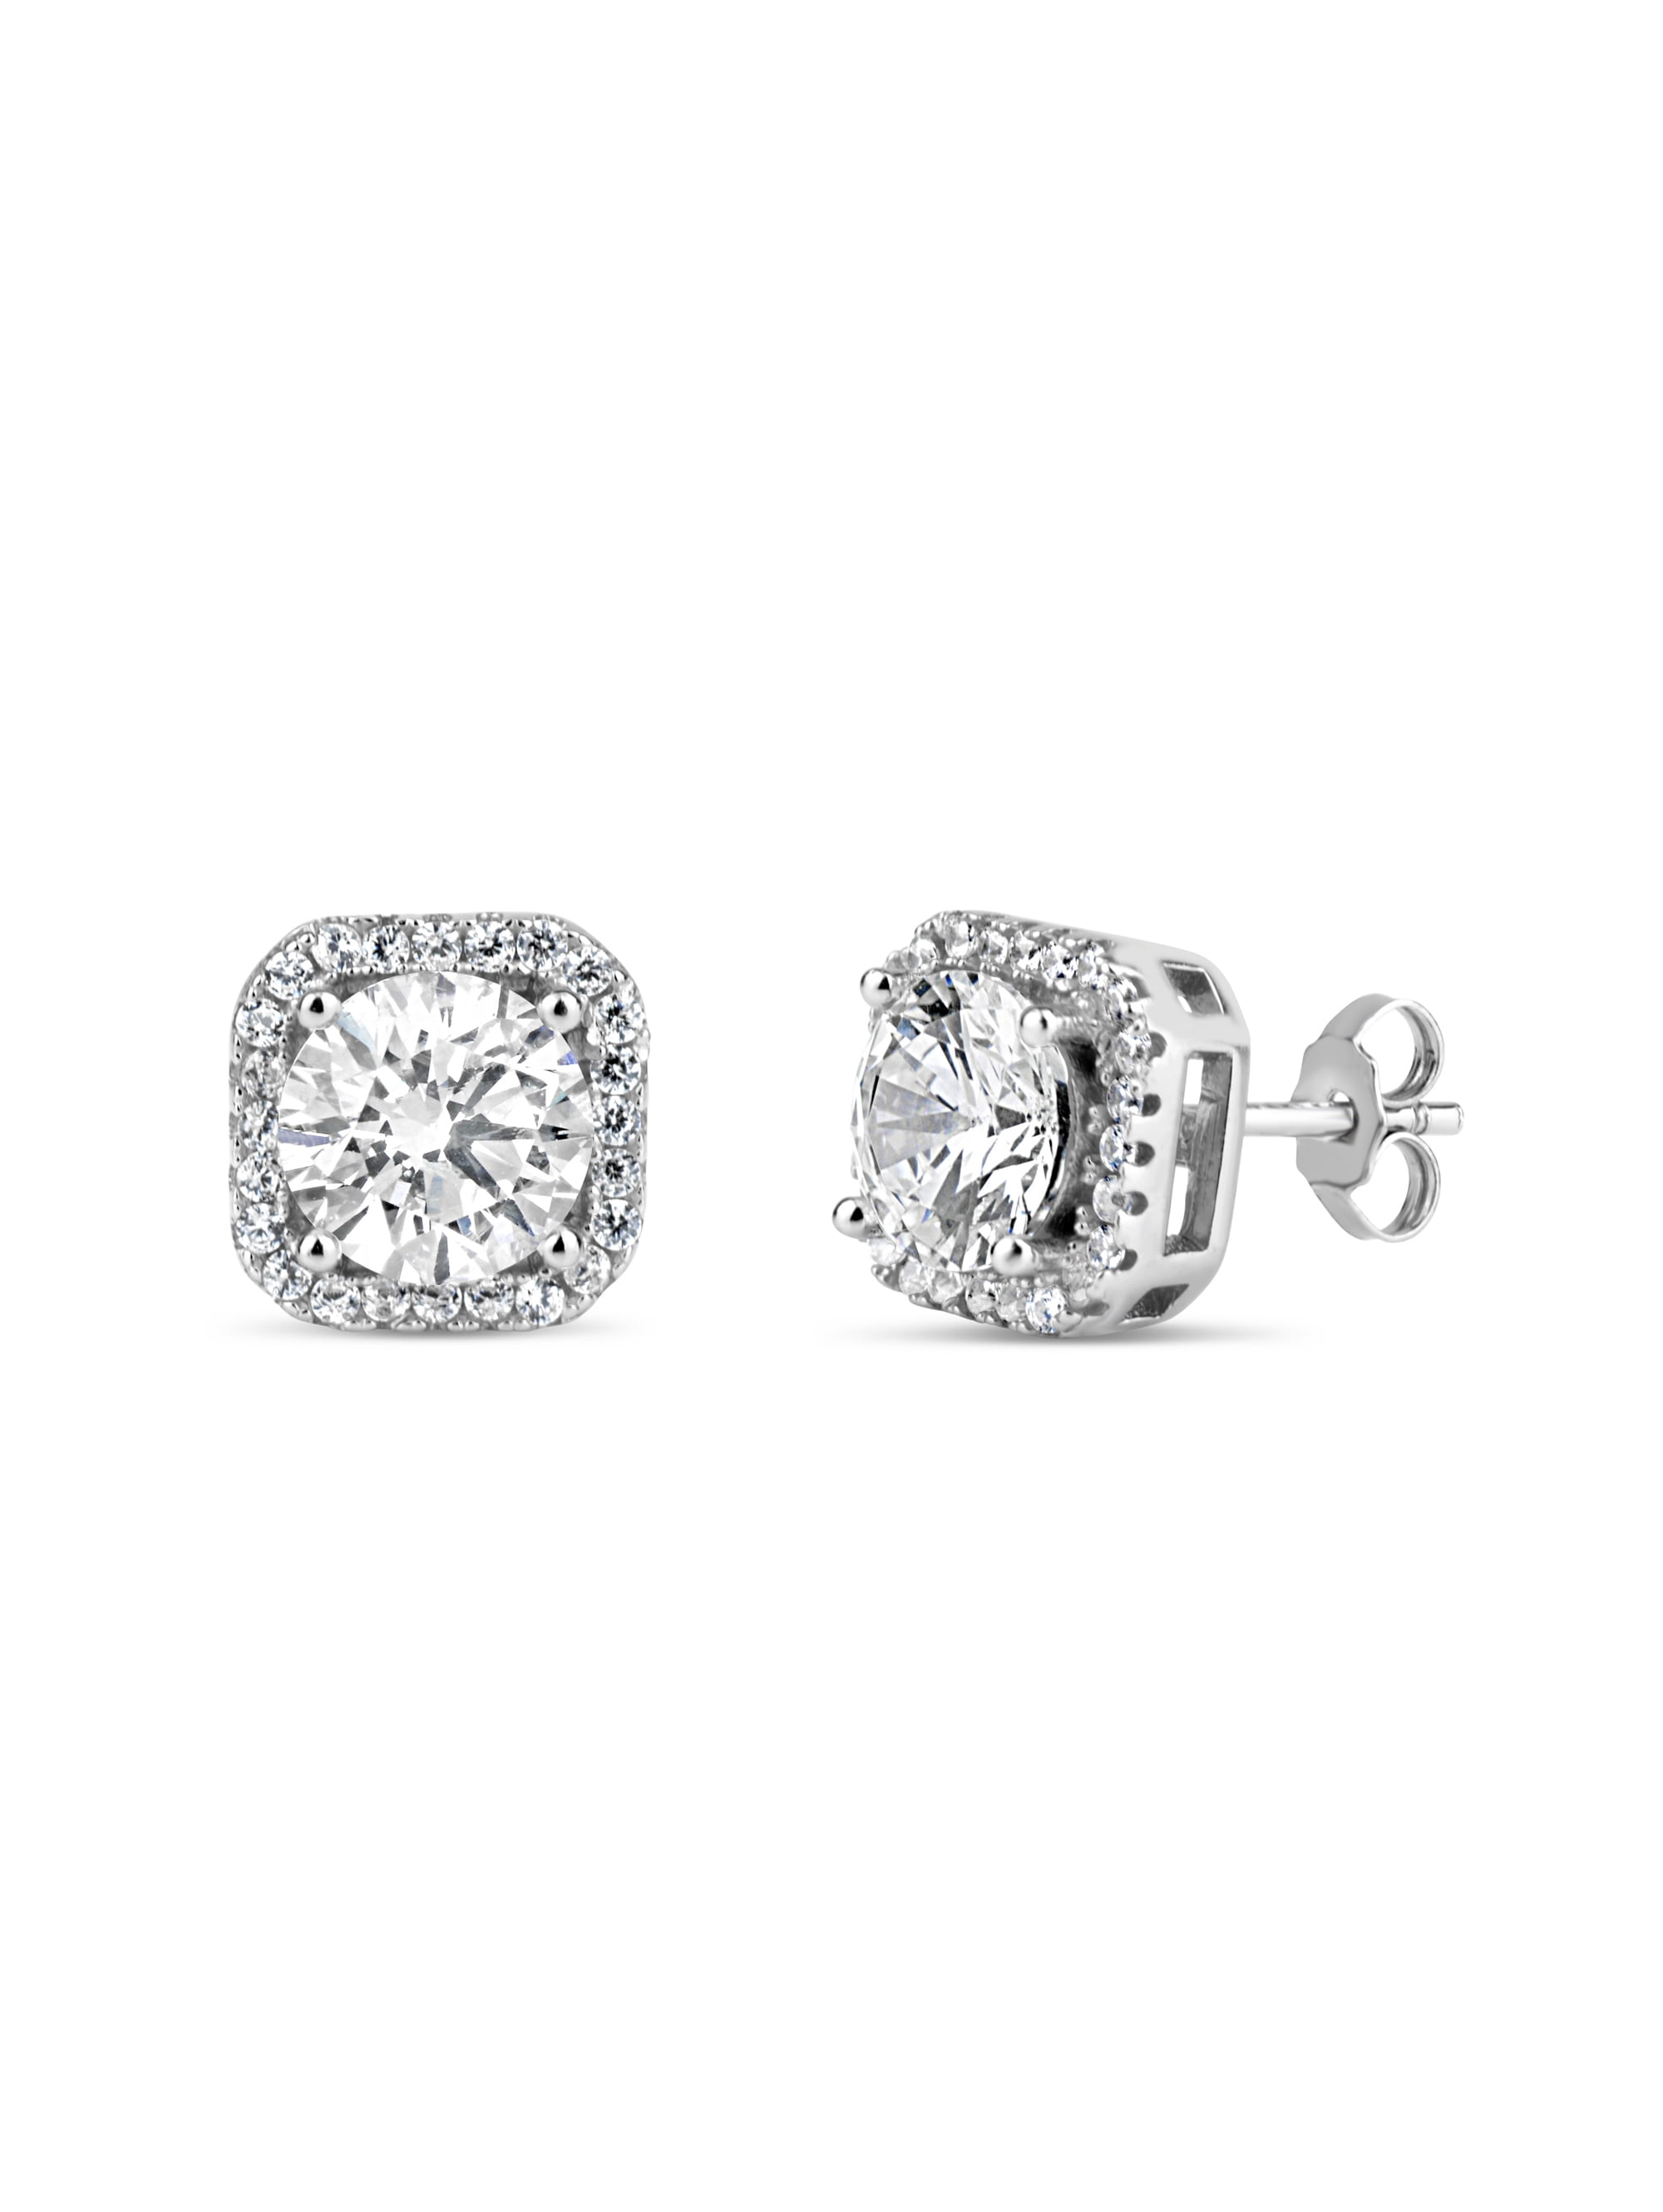 CZ Halo Black Stud Earrings With 2 Carat Center Stone 